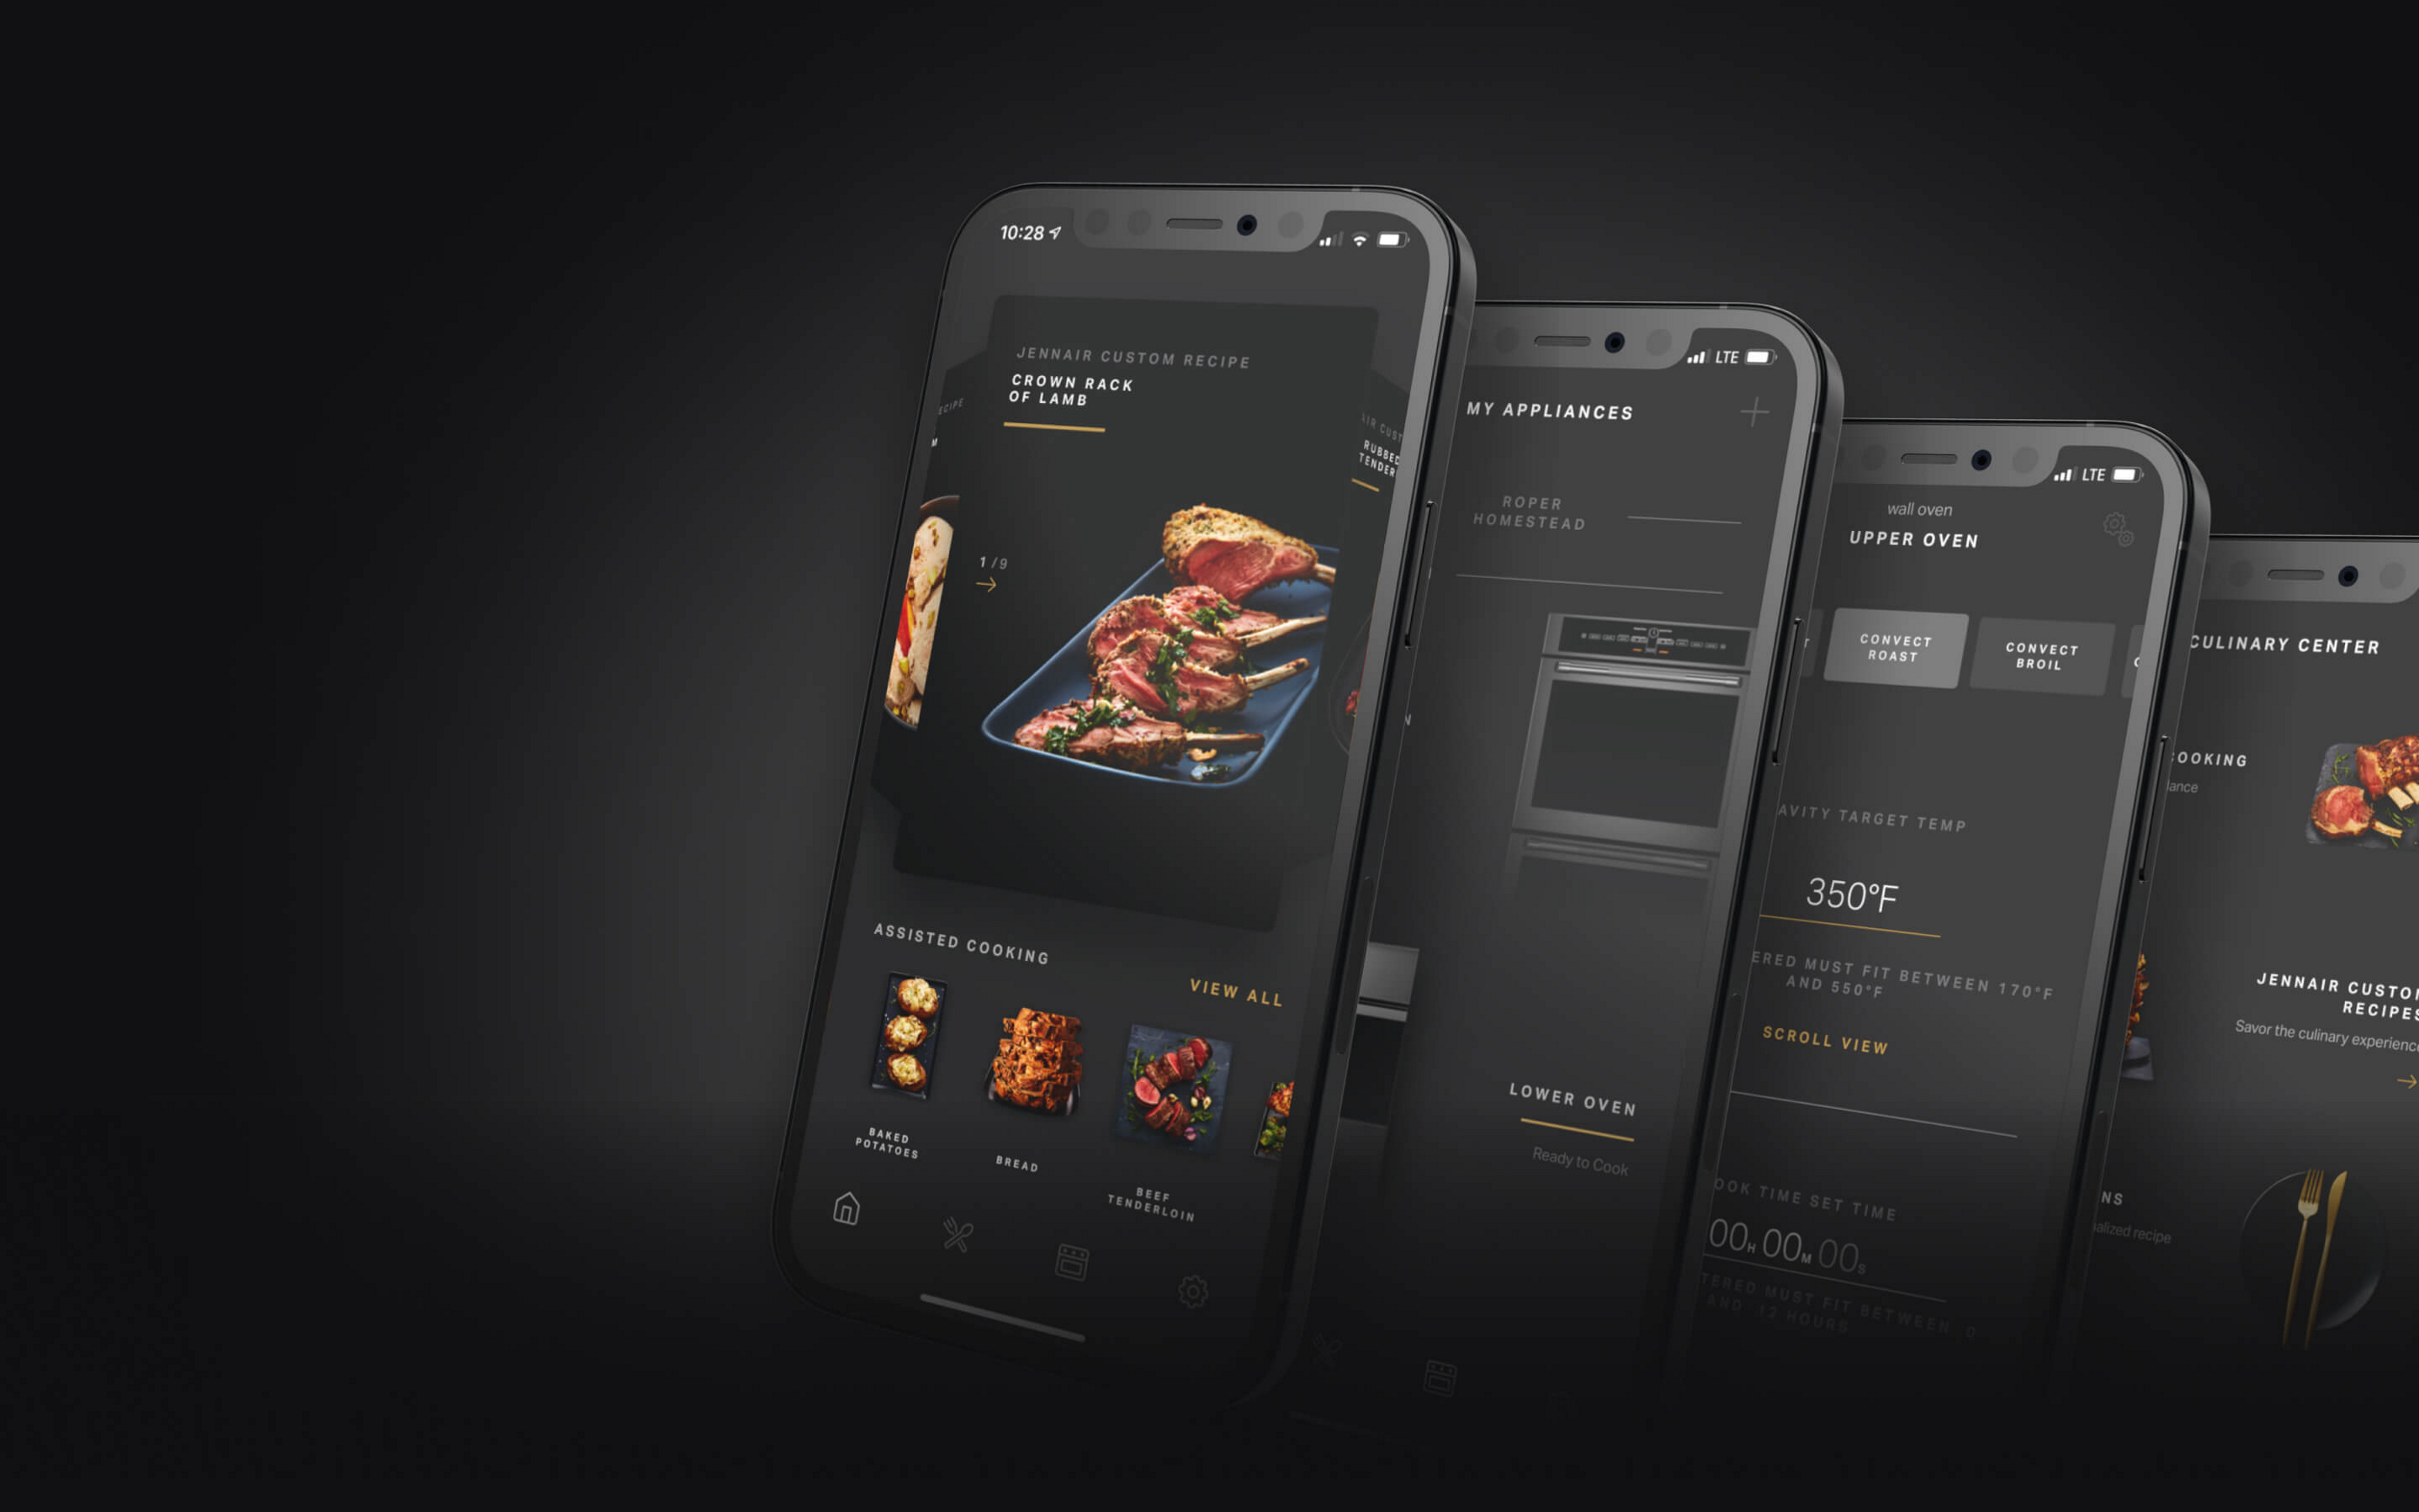 A series of phones showing parts of the JennAir® Culinary Center via the companion app.